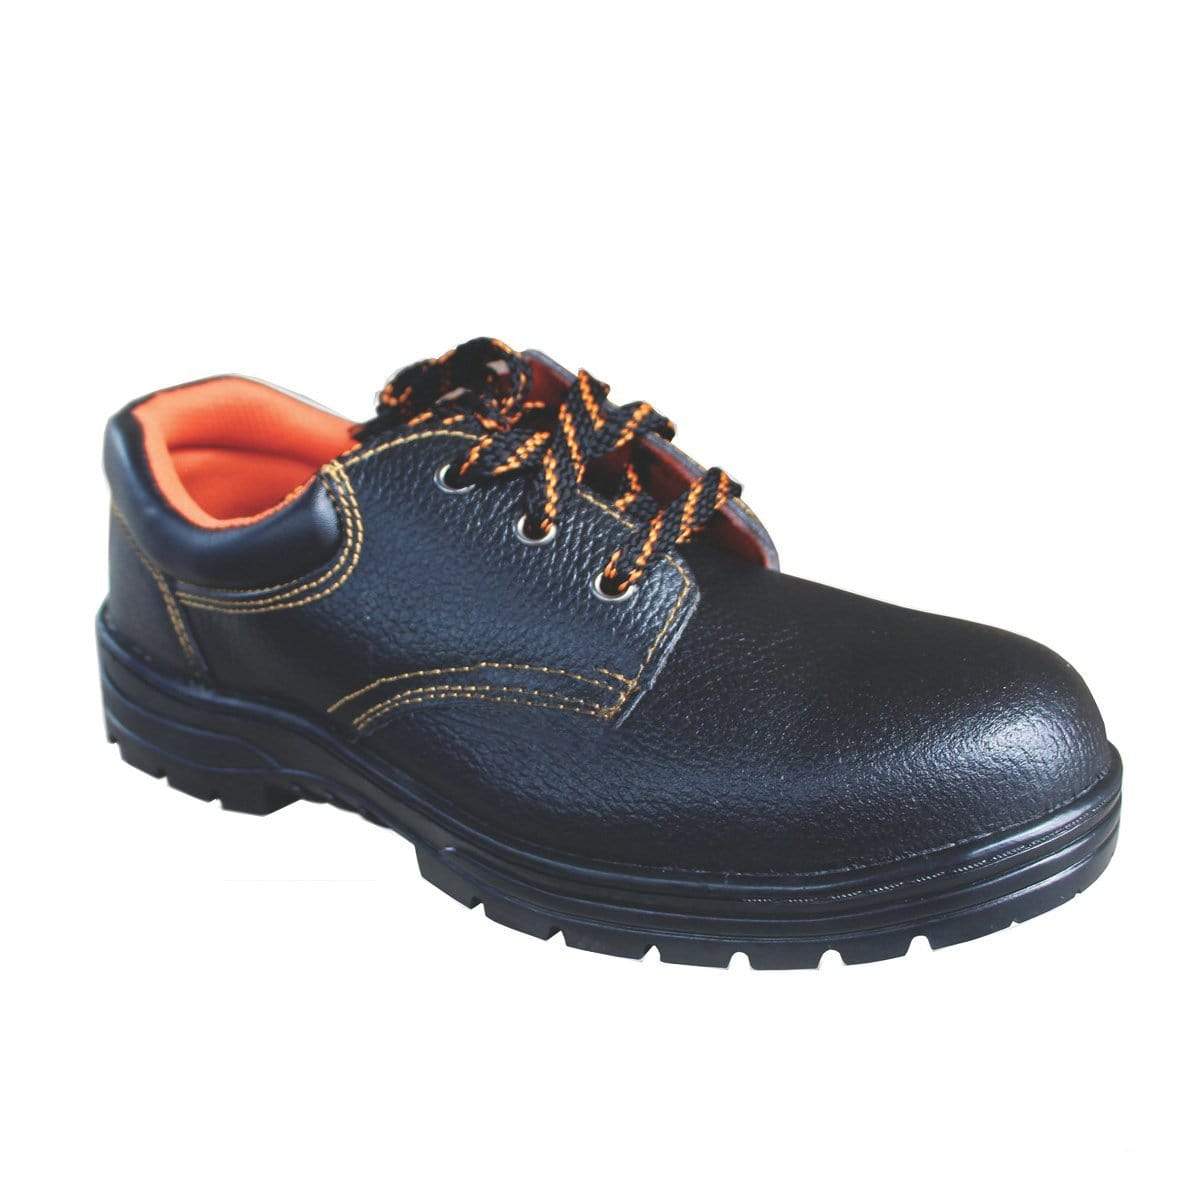 ANEKA Worker Safety Shoes Safety Boots Steel Toe Cap Kasut UK6 1000#